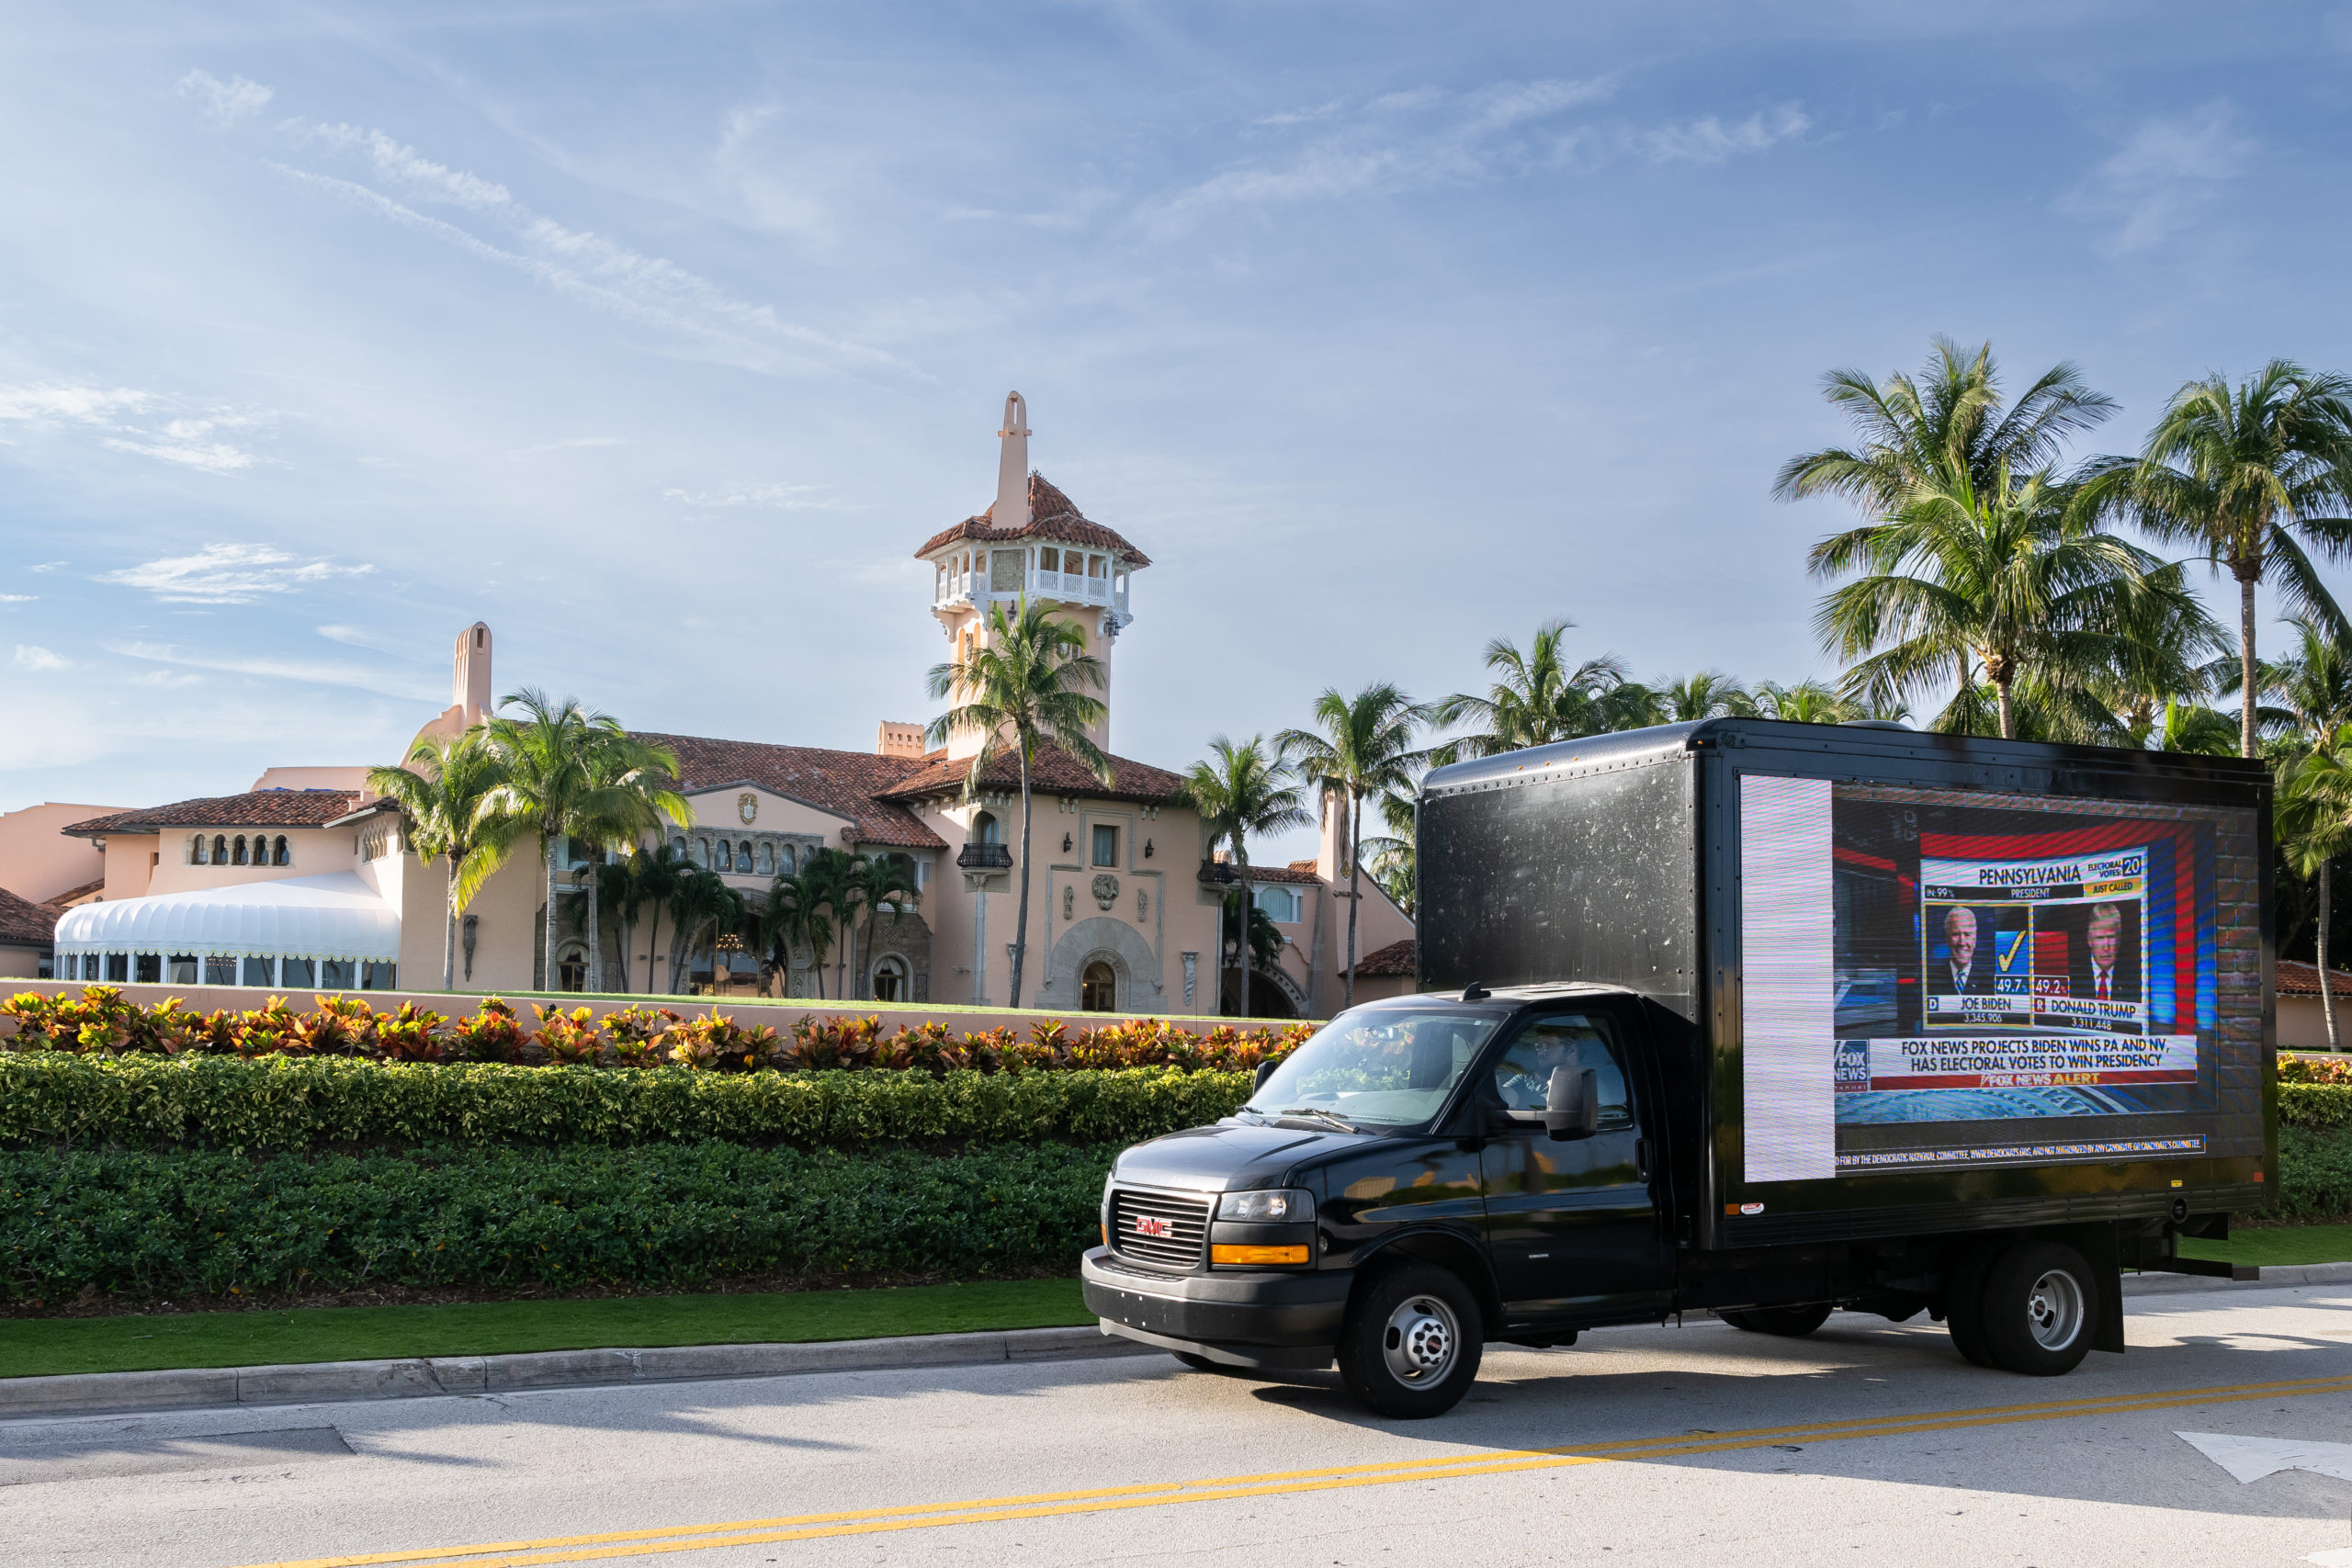 WEST PALM BEACH, FLORIDA - NOVEMBER 15: DNC welcomes Donald Trump to the 2024 GOP Primary by driving a mobile billboard around Mar-A-Lago on November 15, 2022 in Palm Beach, Florida. (Photo by Jason Koerner/Getty Images for DNC)